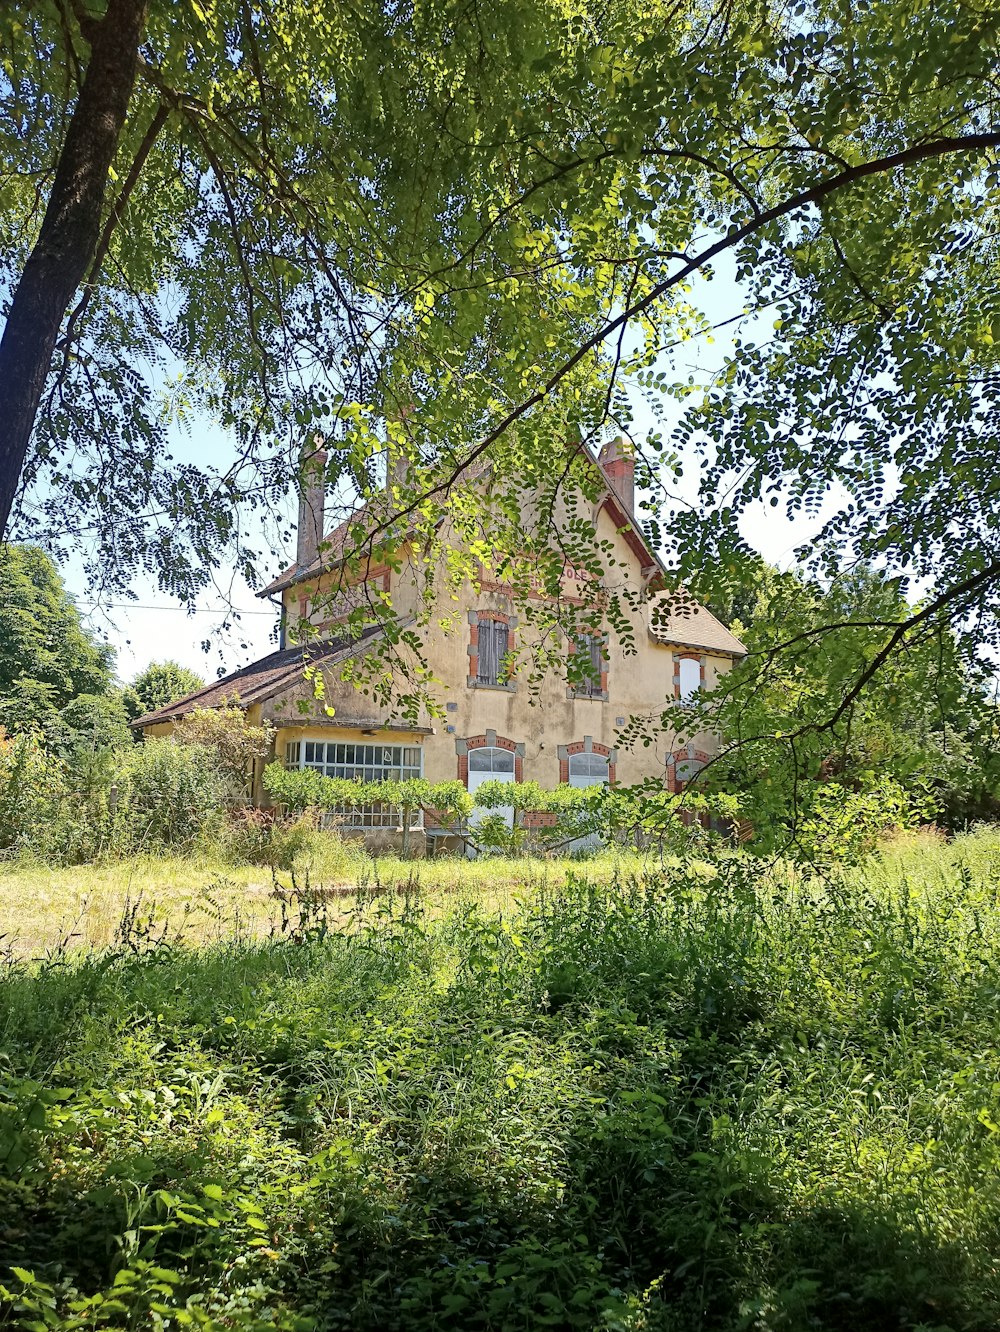 a large house sitting in the middle of a lush green field